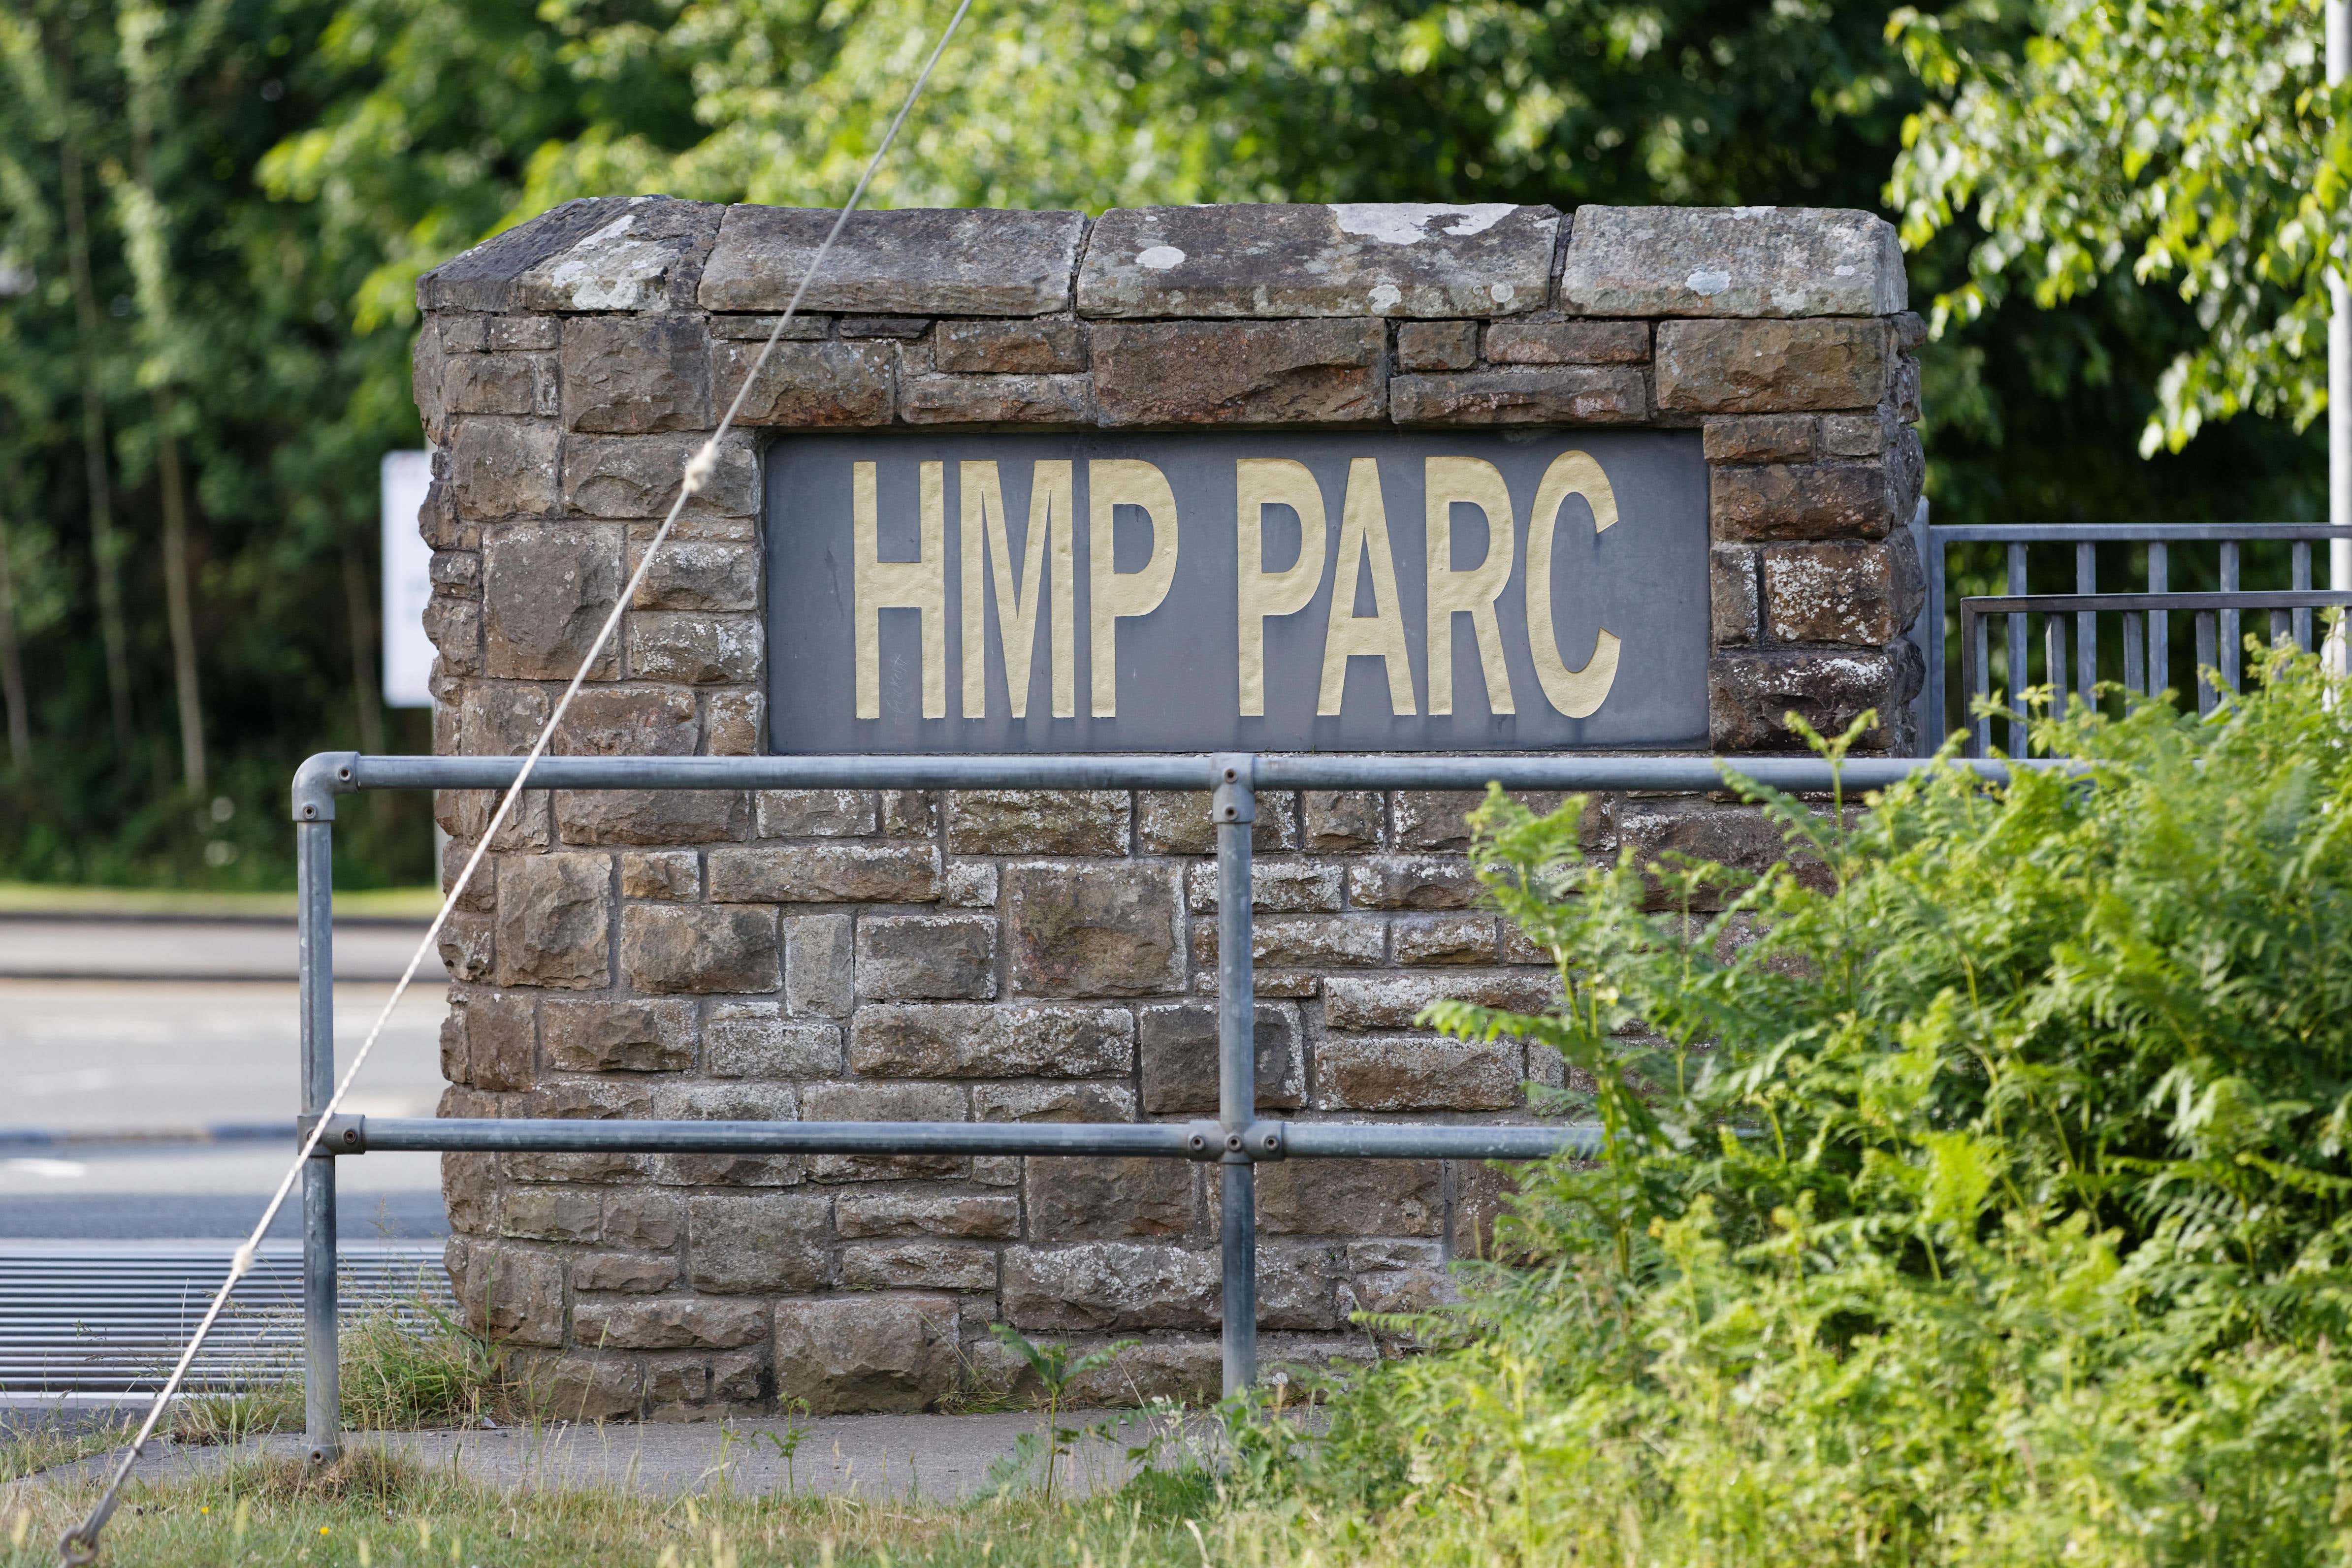 prisons, jail, prison officers, hmp parc, riot, drugs, synthetic opioids, ‘titanic deckchairs’ as governor at super-prison suffering staff exodus sent to run jail hit by deaths